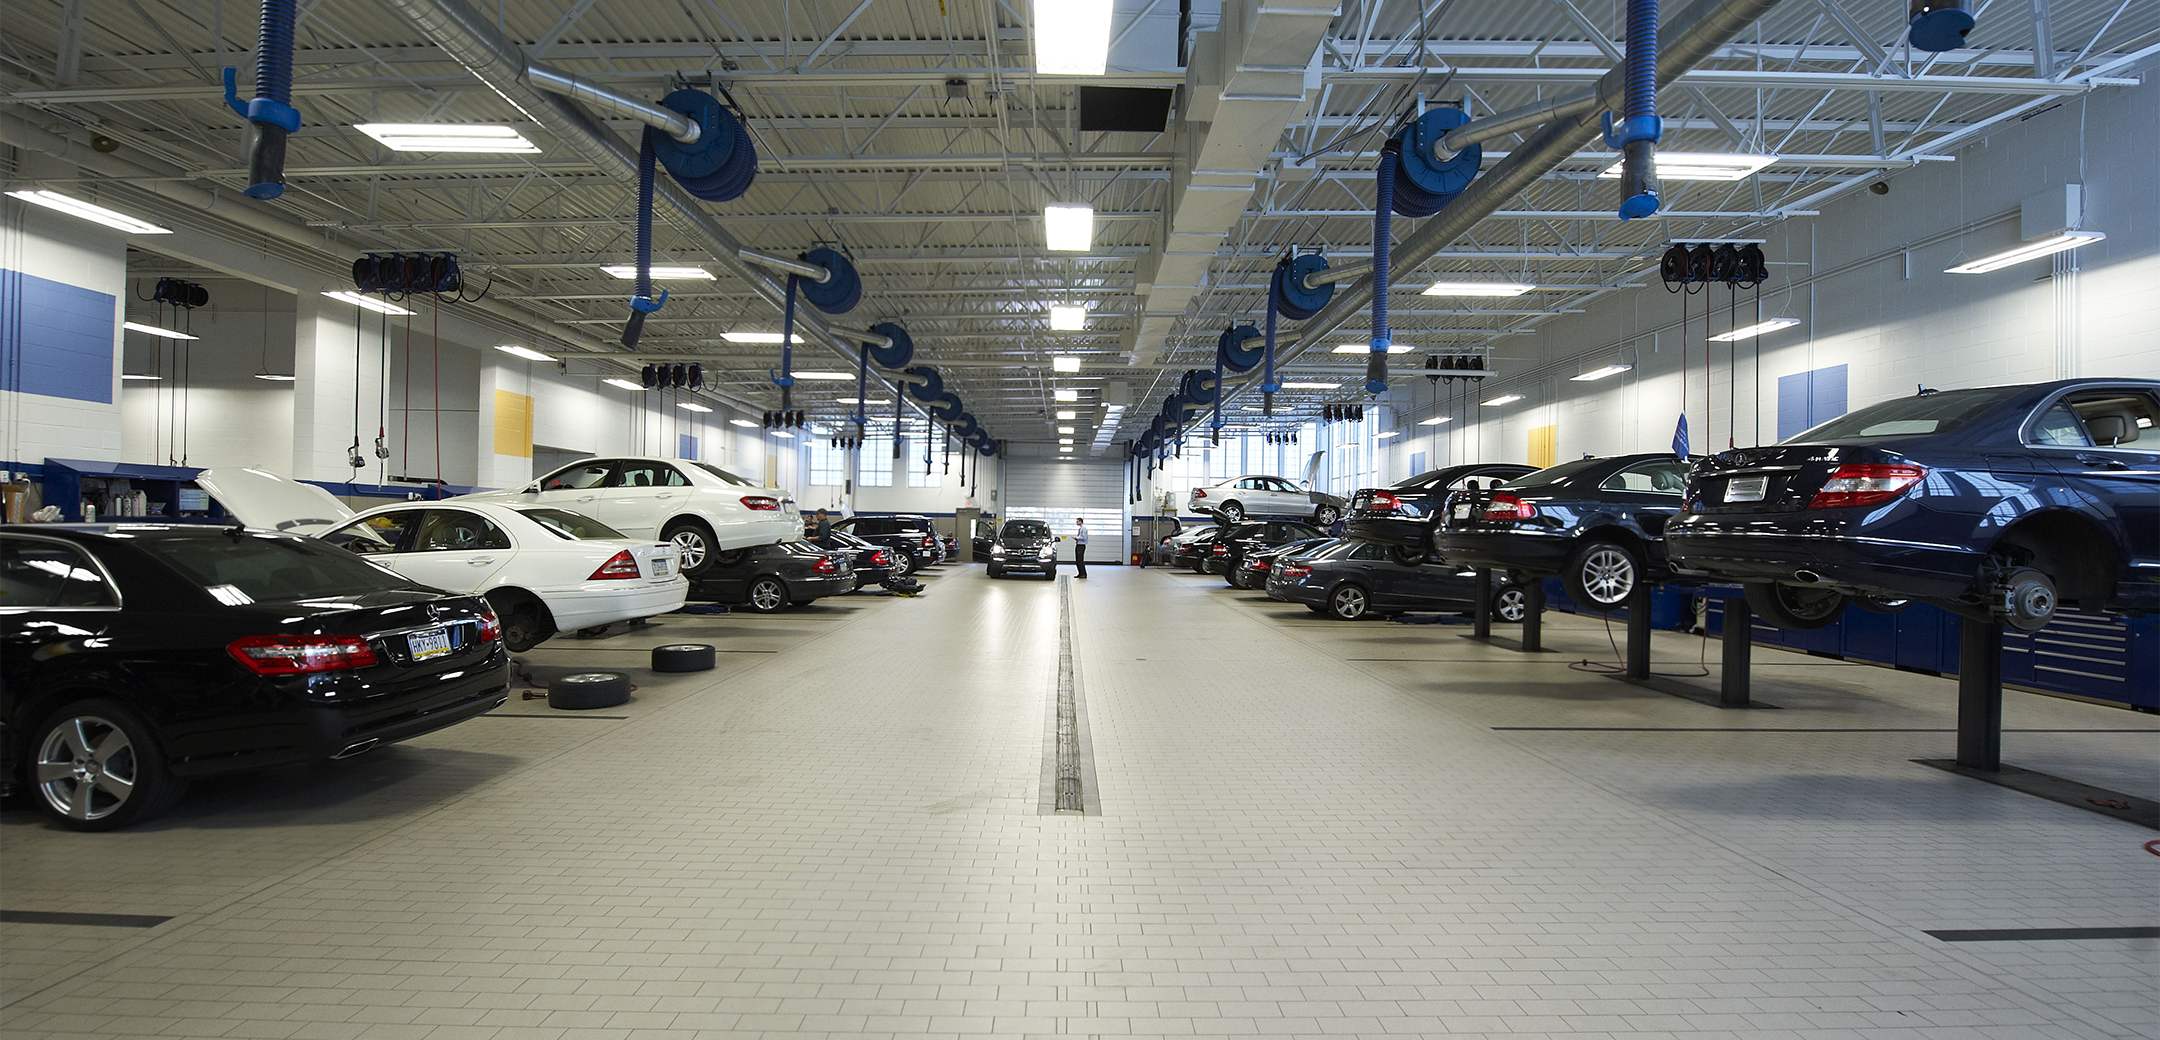 An angled interior view of the Euro Motorcars brick floor, tall ceiling with an adjustable vacuum system and cars on both left and right side lined up along the wall.